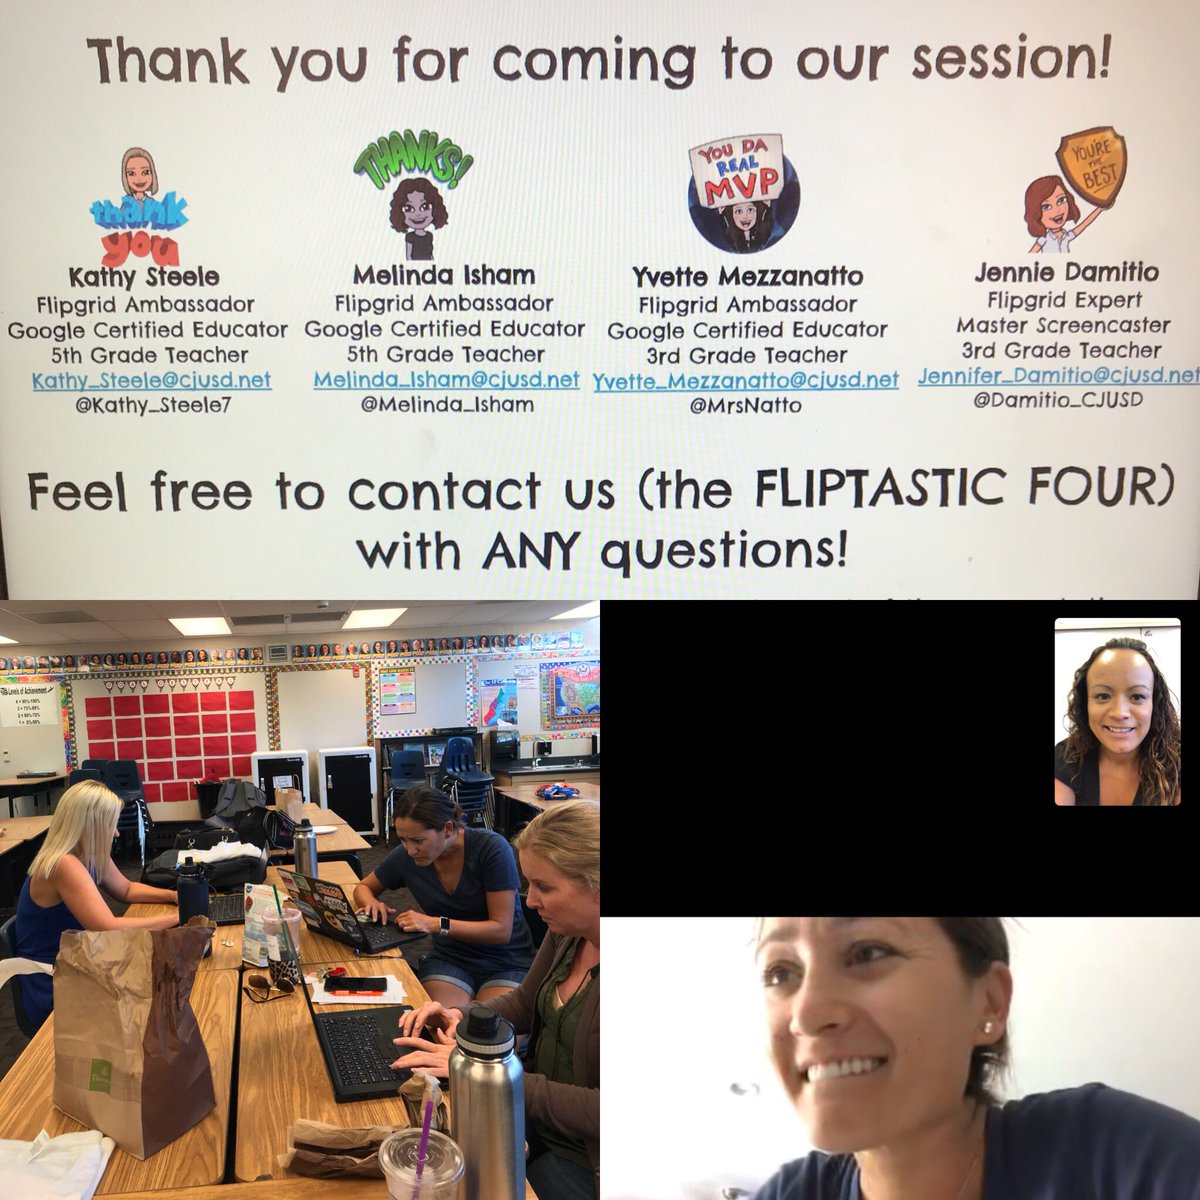 Prepping with #TheFliptasticFour @Damitio_CJUSD @MrsNatto @Kathy_Steele7 for our session, Caught that @Flipgrid Fever? So what’s next? at #CampEd3. @Crestmore_CJUSD @EdTechCJUSD